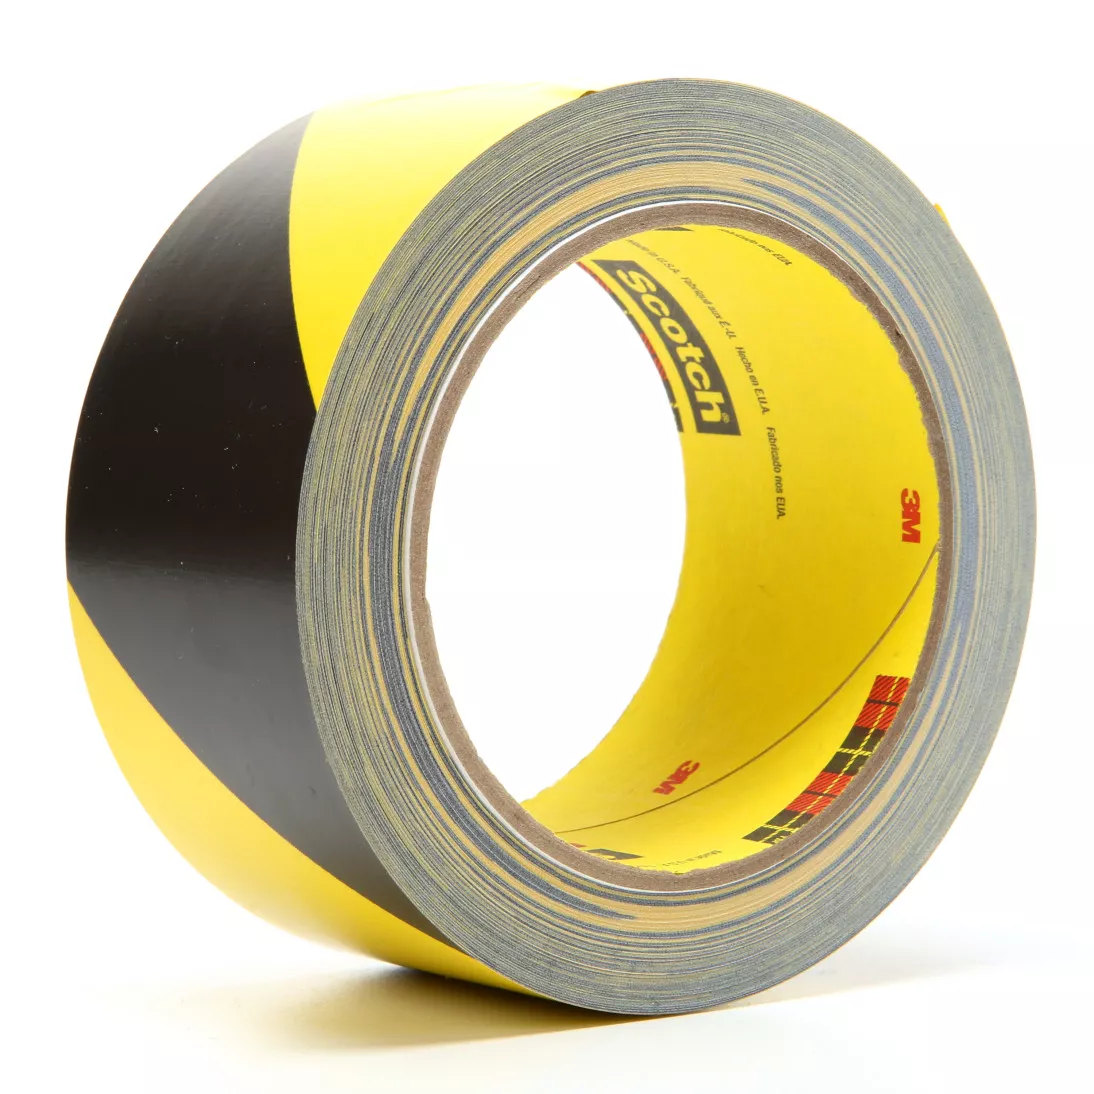 3M™ Safety Stripe Tape 5702, Black/Yellow, 2 in x 36 yd, 5.4 mil, 24 Roll/Case